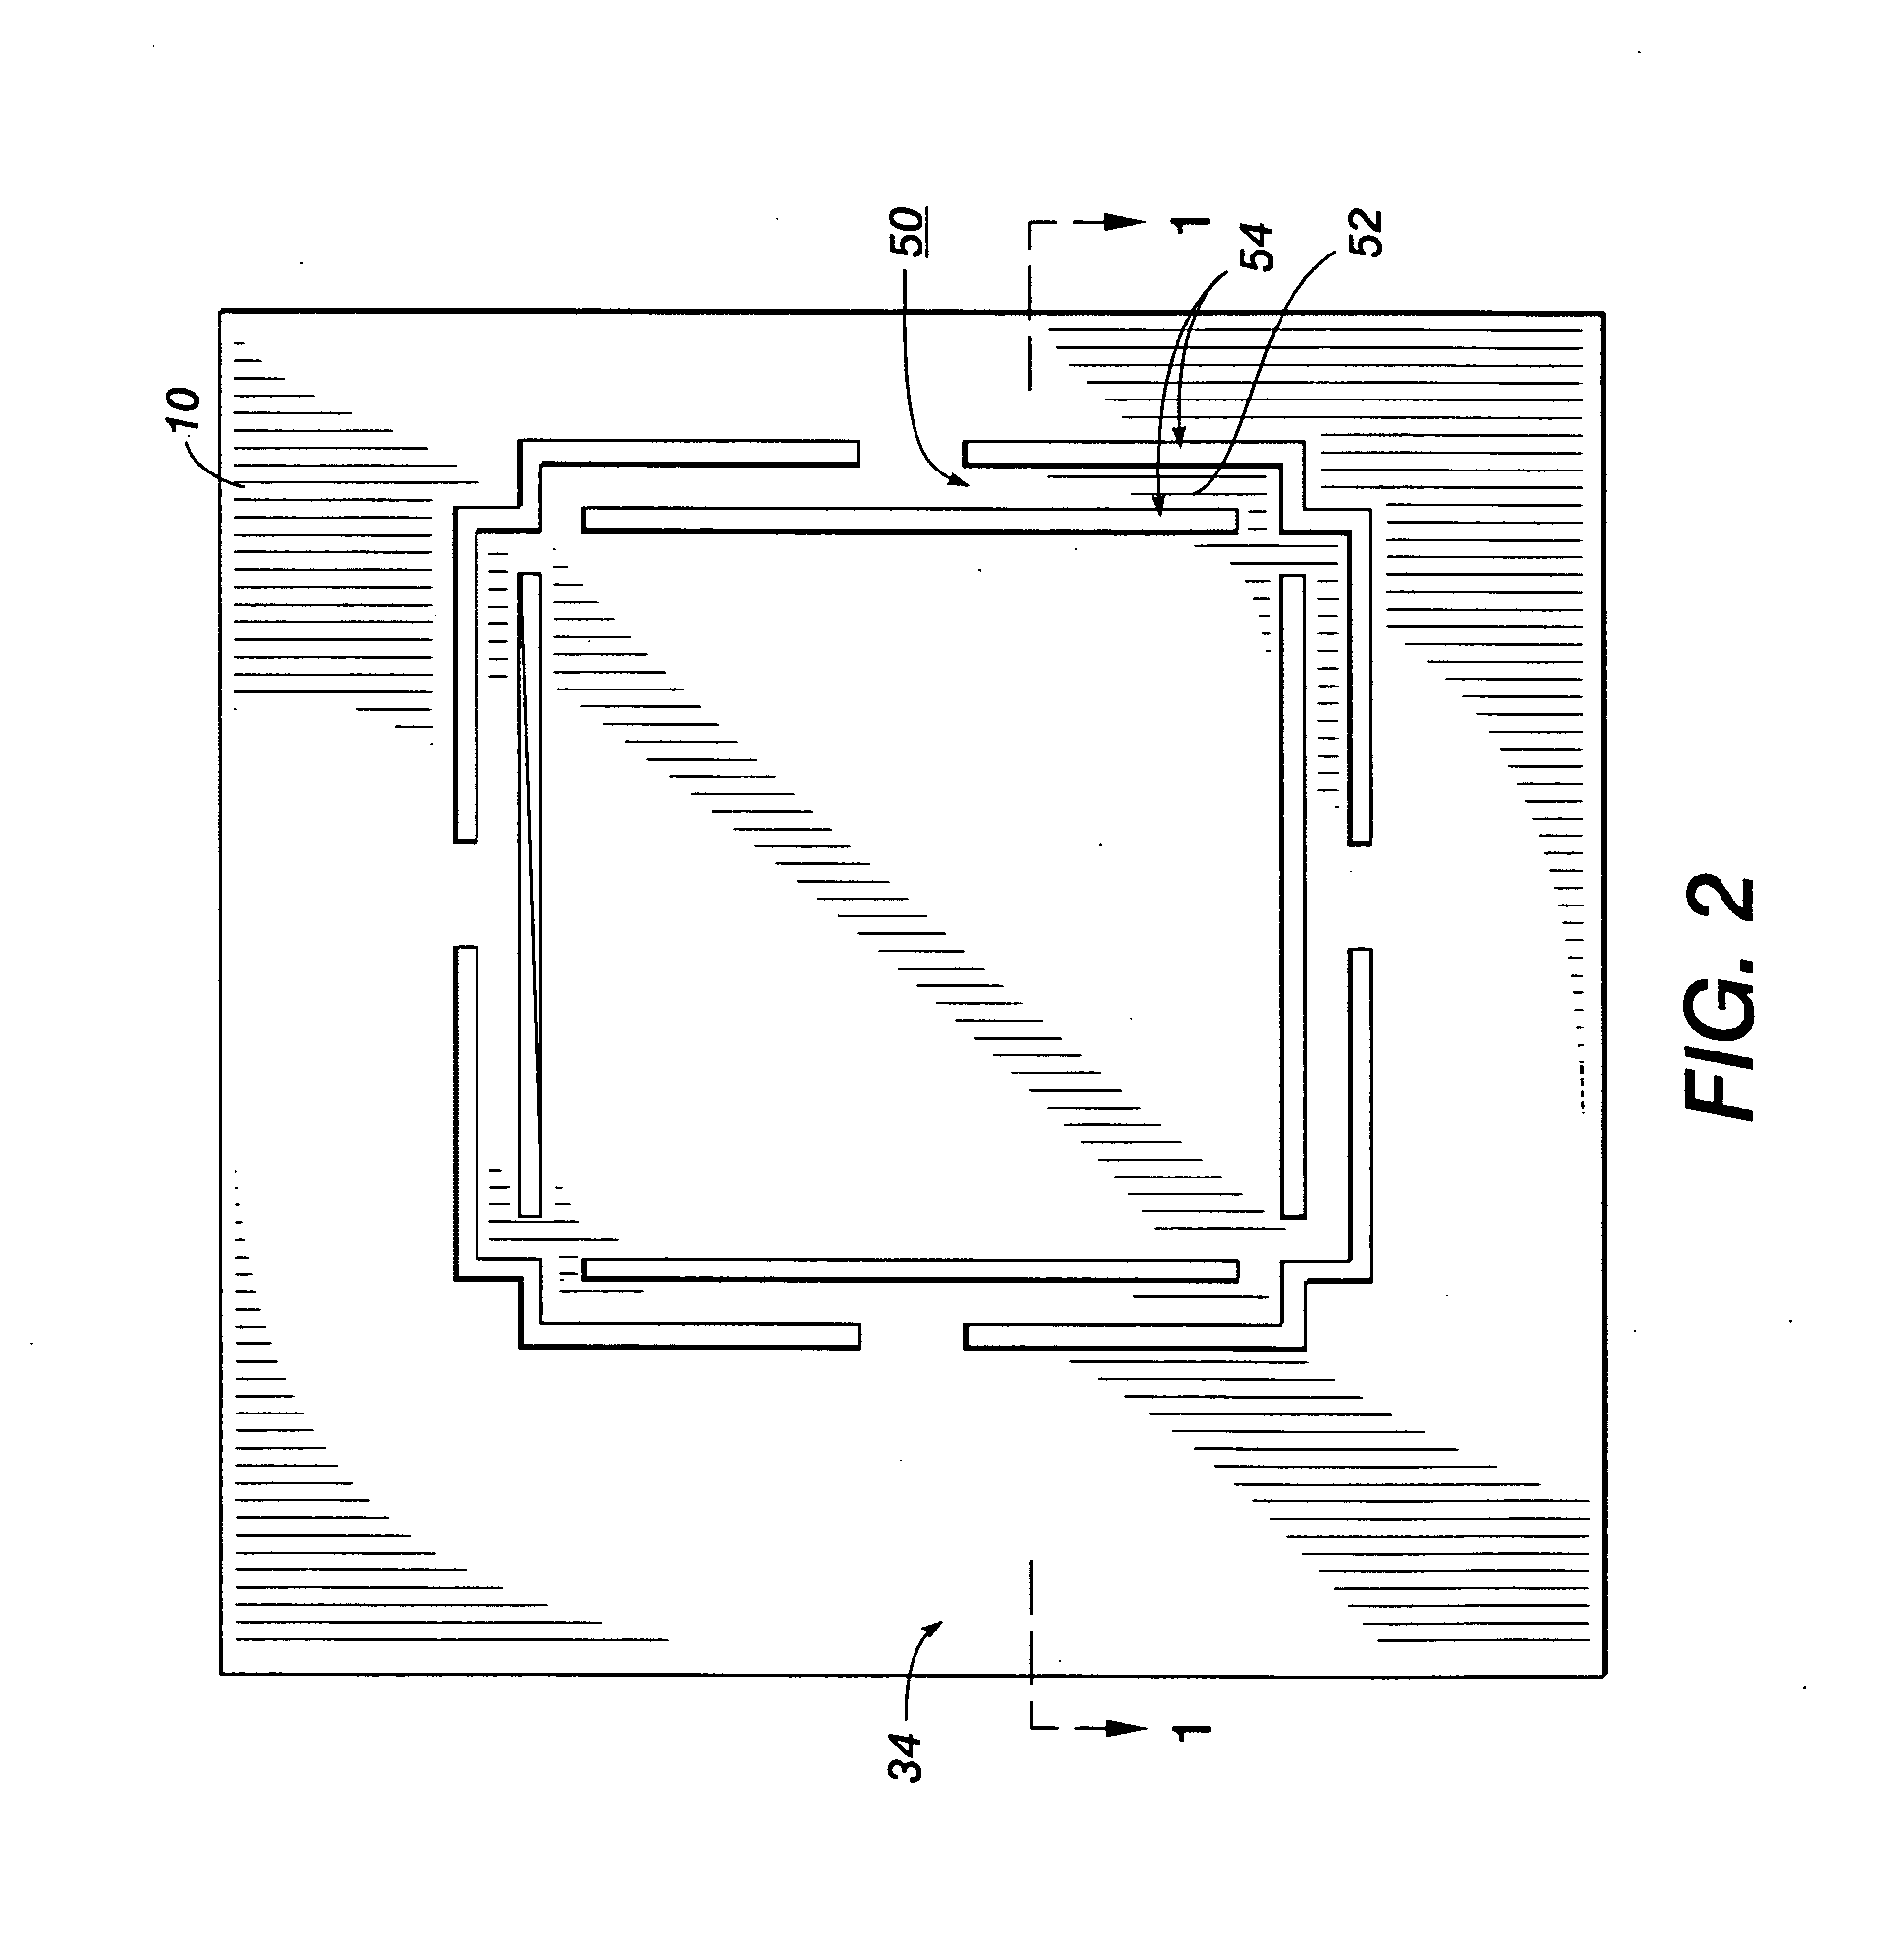 Fabry-Perot tunable filter using a bonded pair of transparent substrates